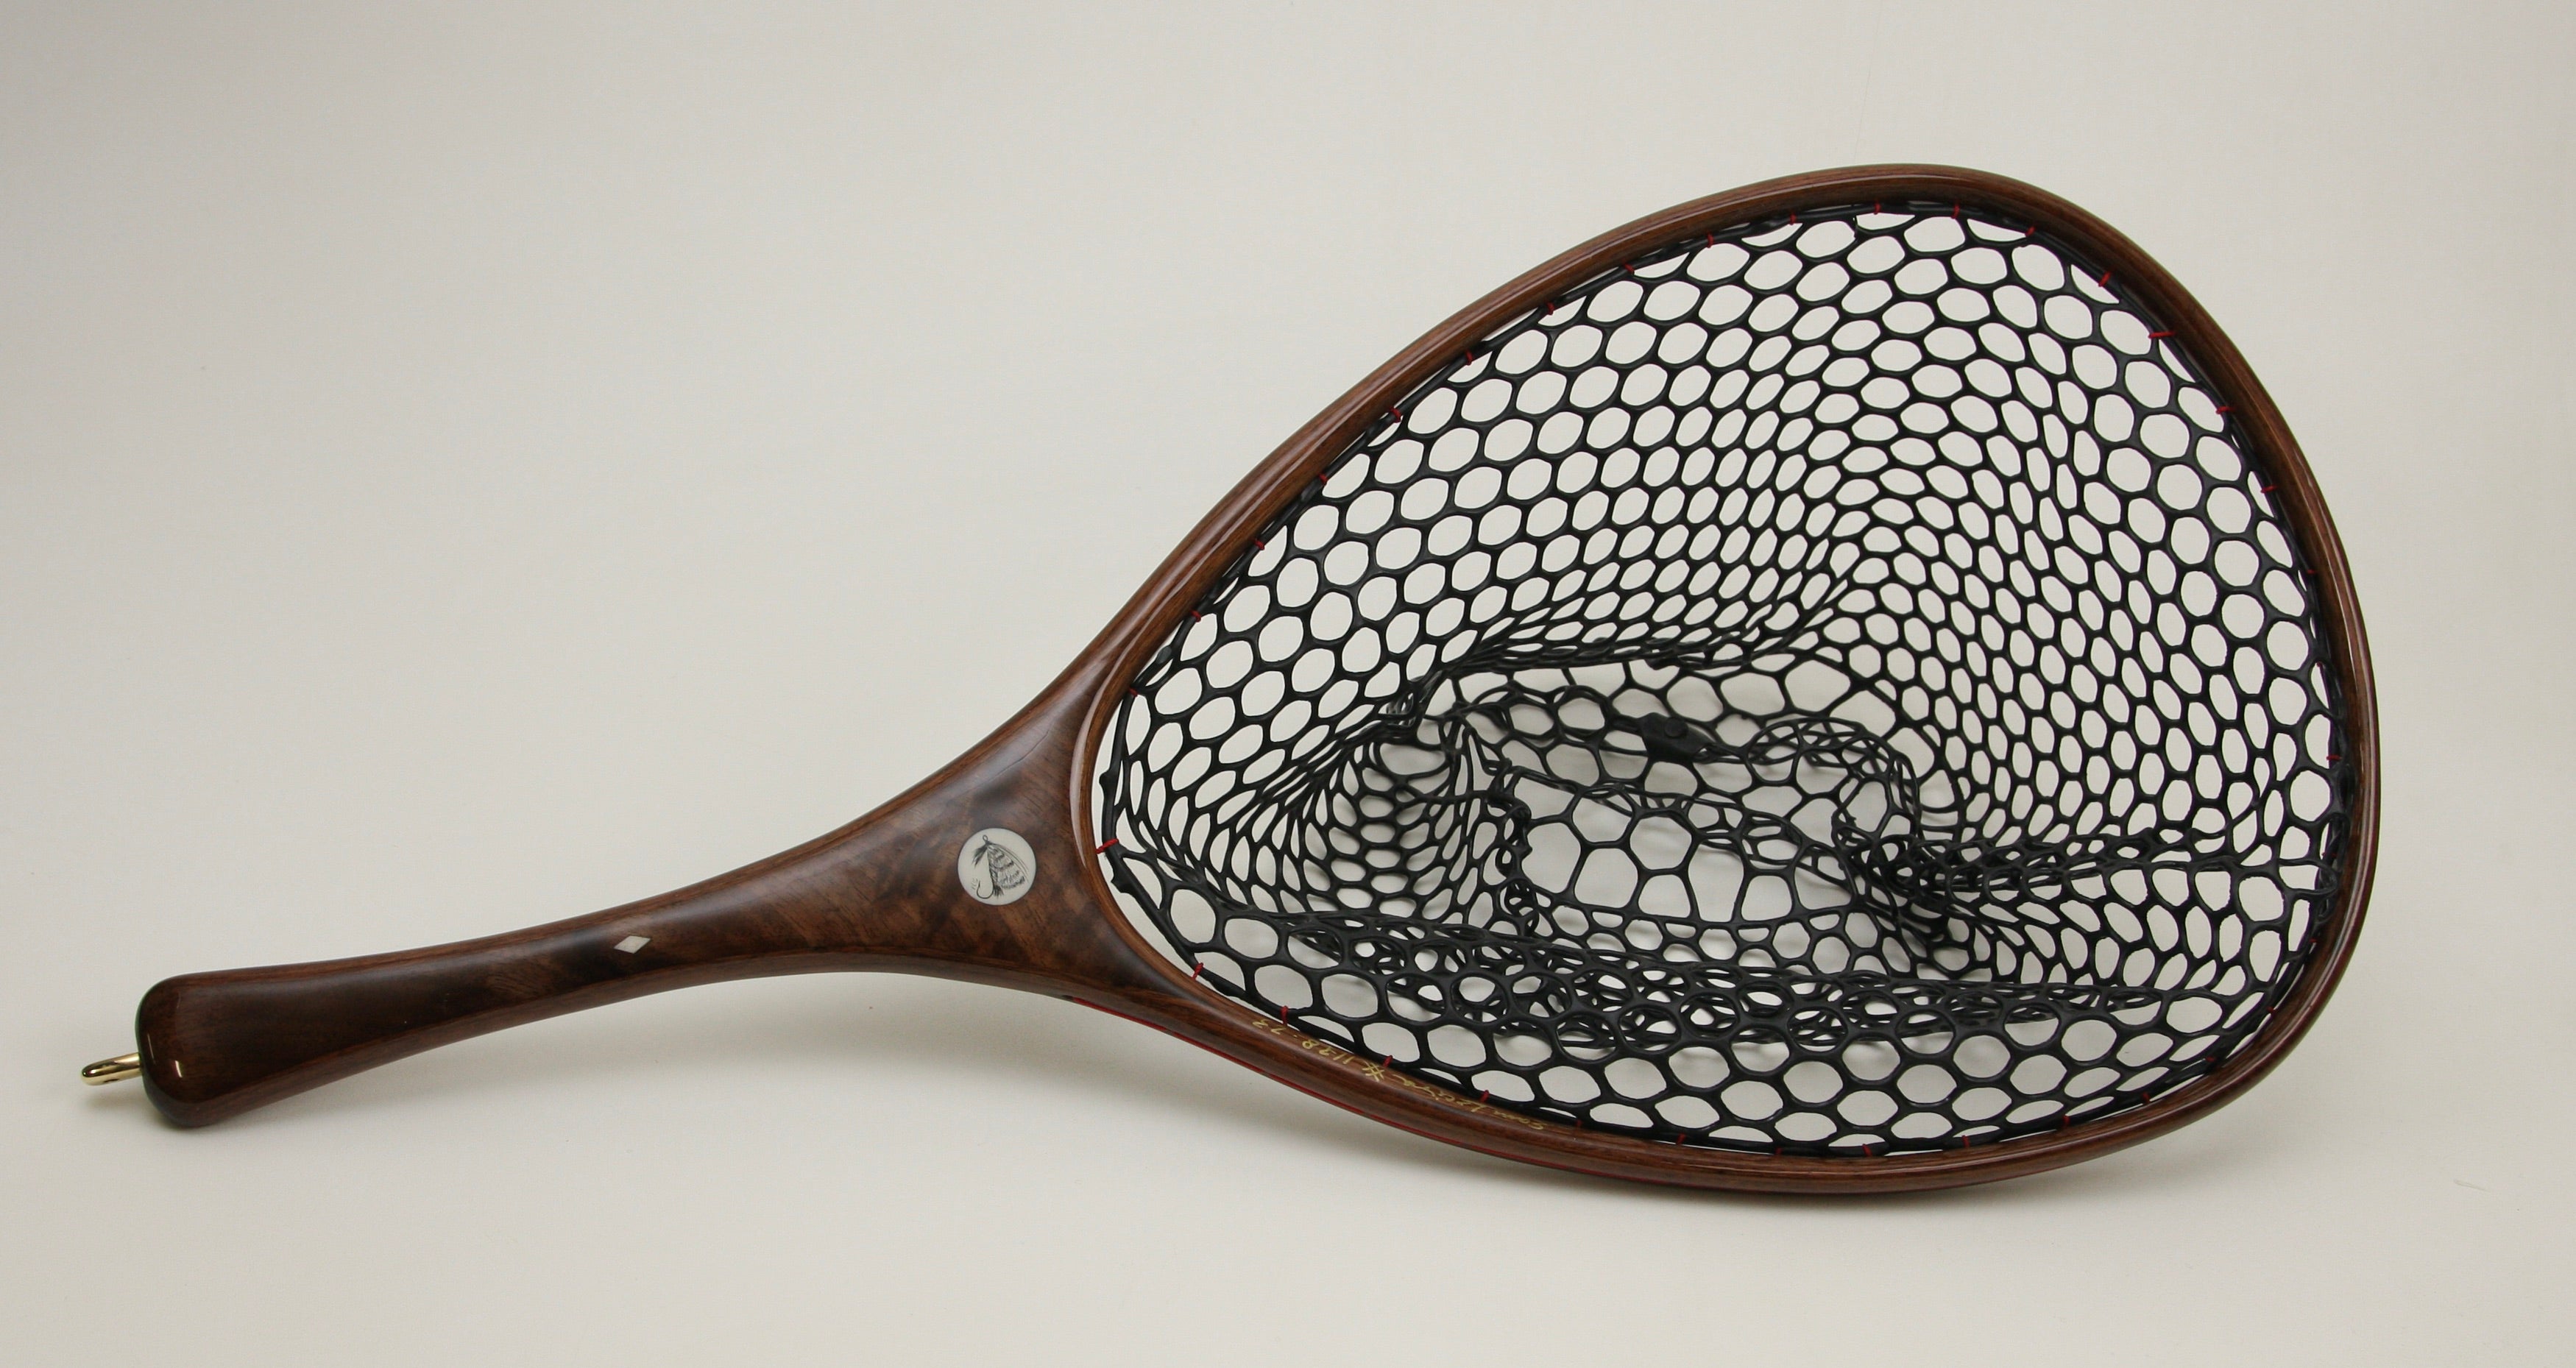 Large Fly Fishing Net: Walnut and Art - Nets that Honor the Fish